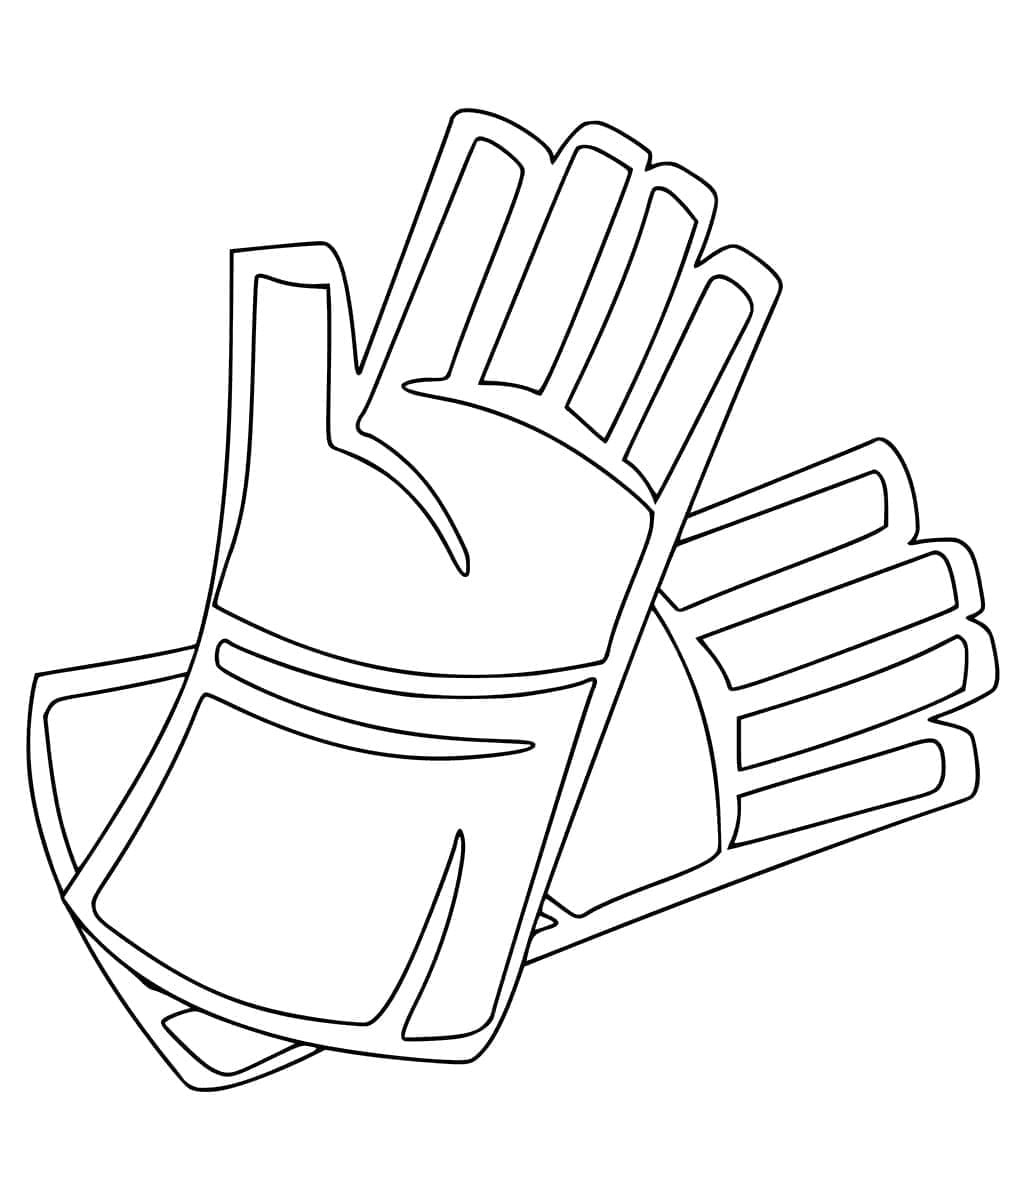 Gloves image coloring page